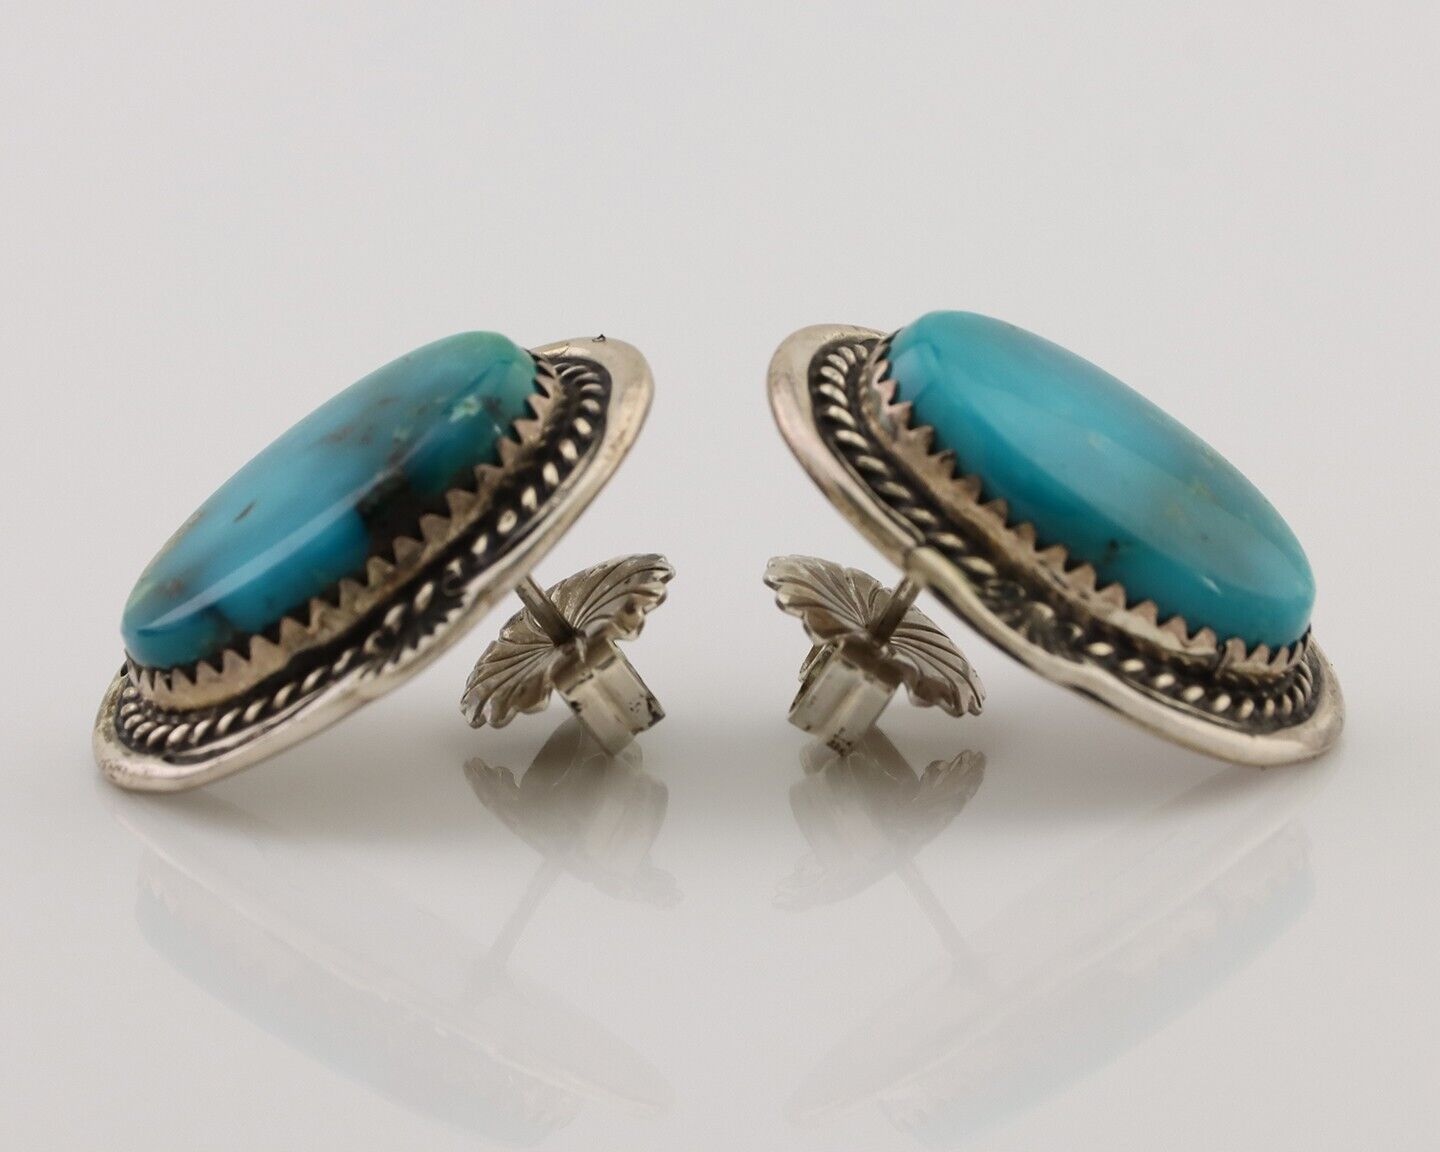 Navajo Earrings 925 Silver Mined Turquoise Artist Signed M Begay C.80's